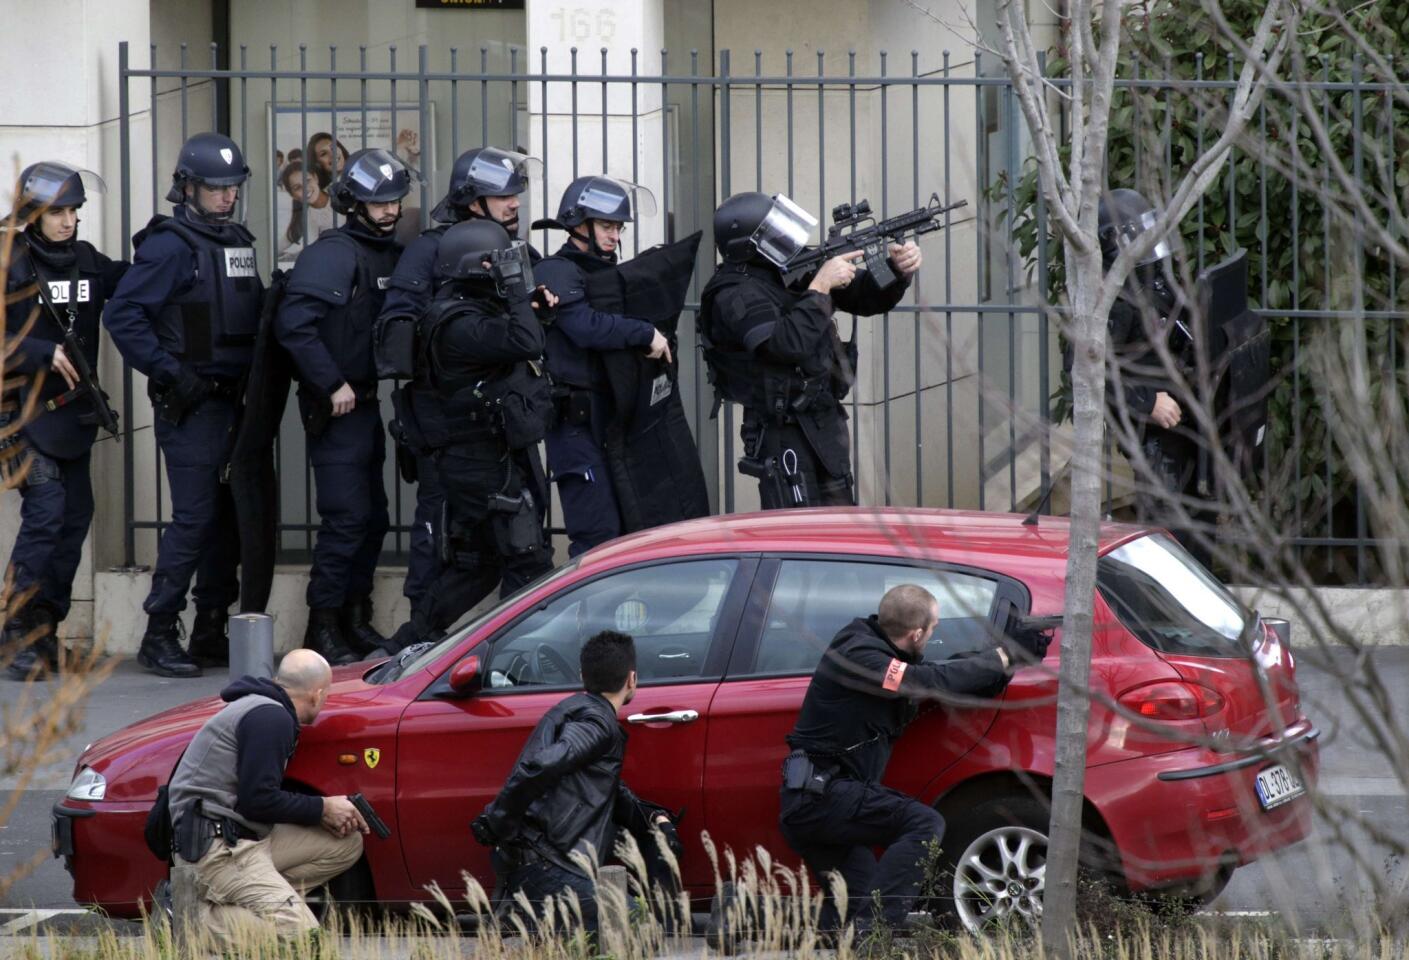 French Research and Intervention Brigades (BRI) officers gather near the post office where an armed man is holed up with two hostages in Colombes, outside Paris.